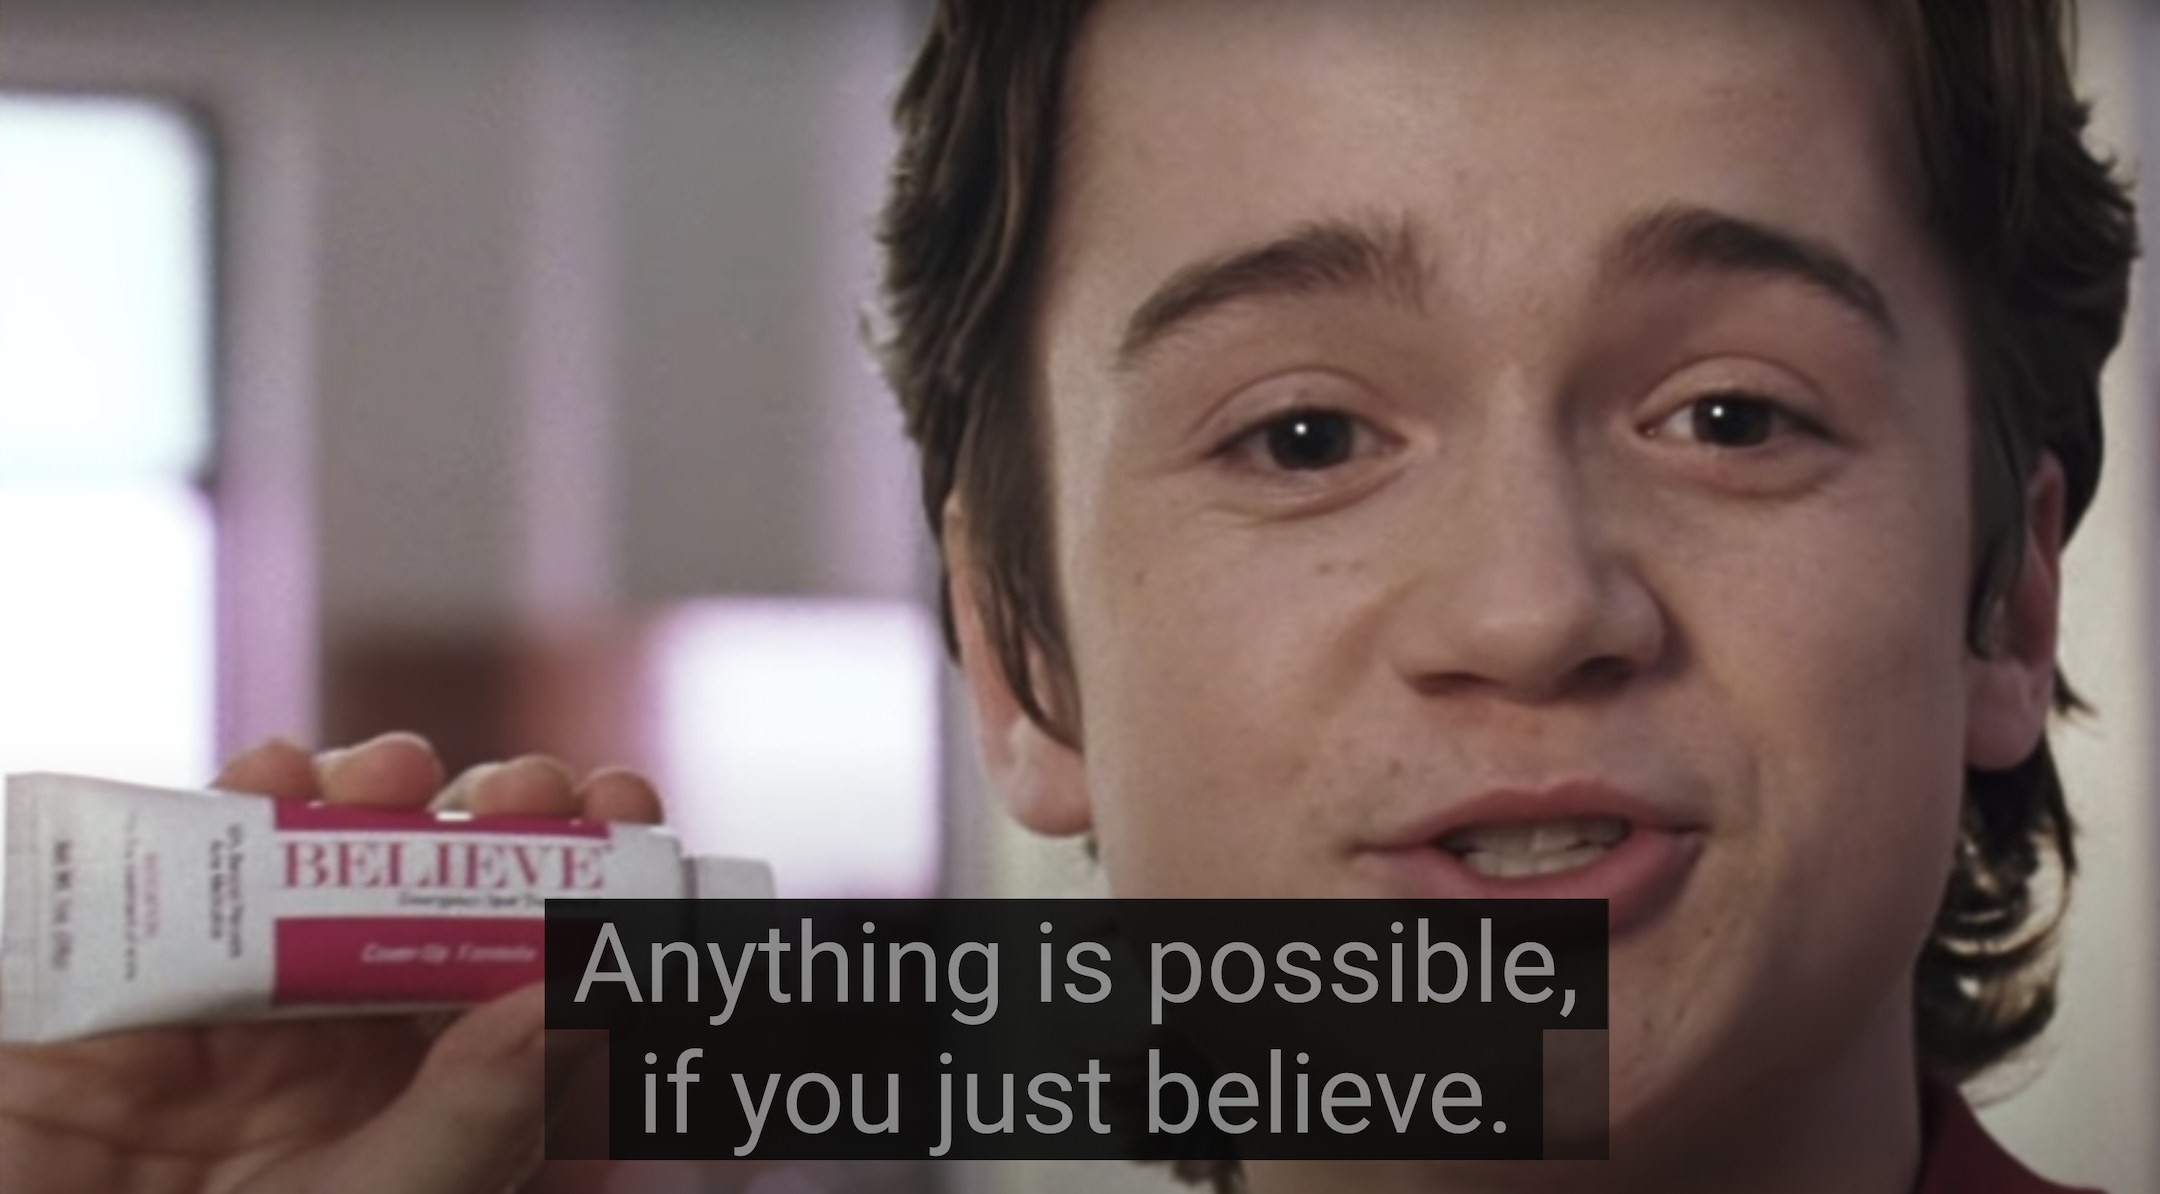 Carter is holding a bottle of a skin product called Believe and says, Anything is possible if you just believe